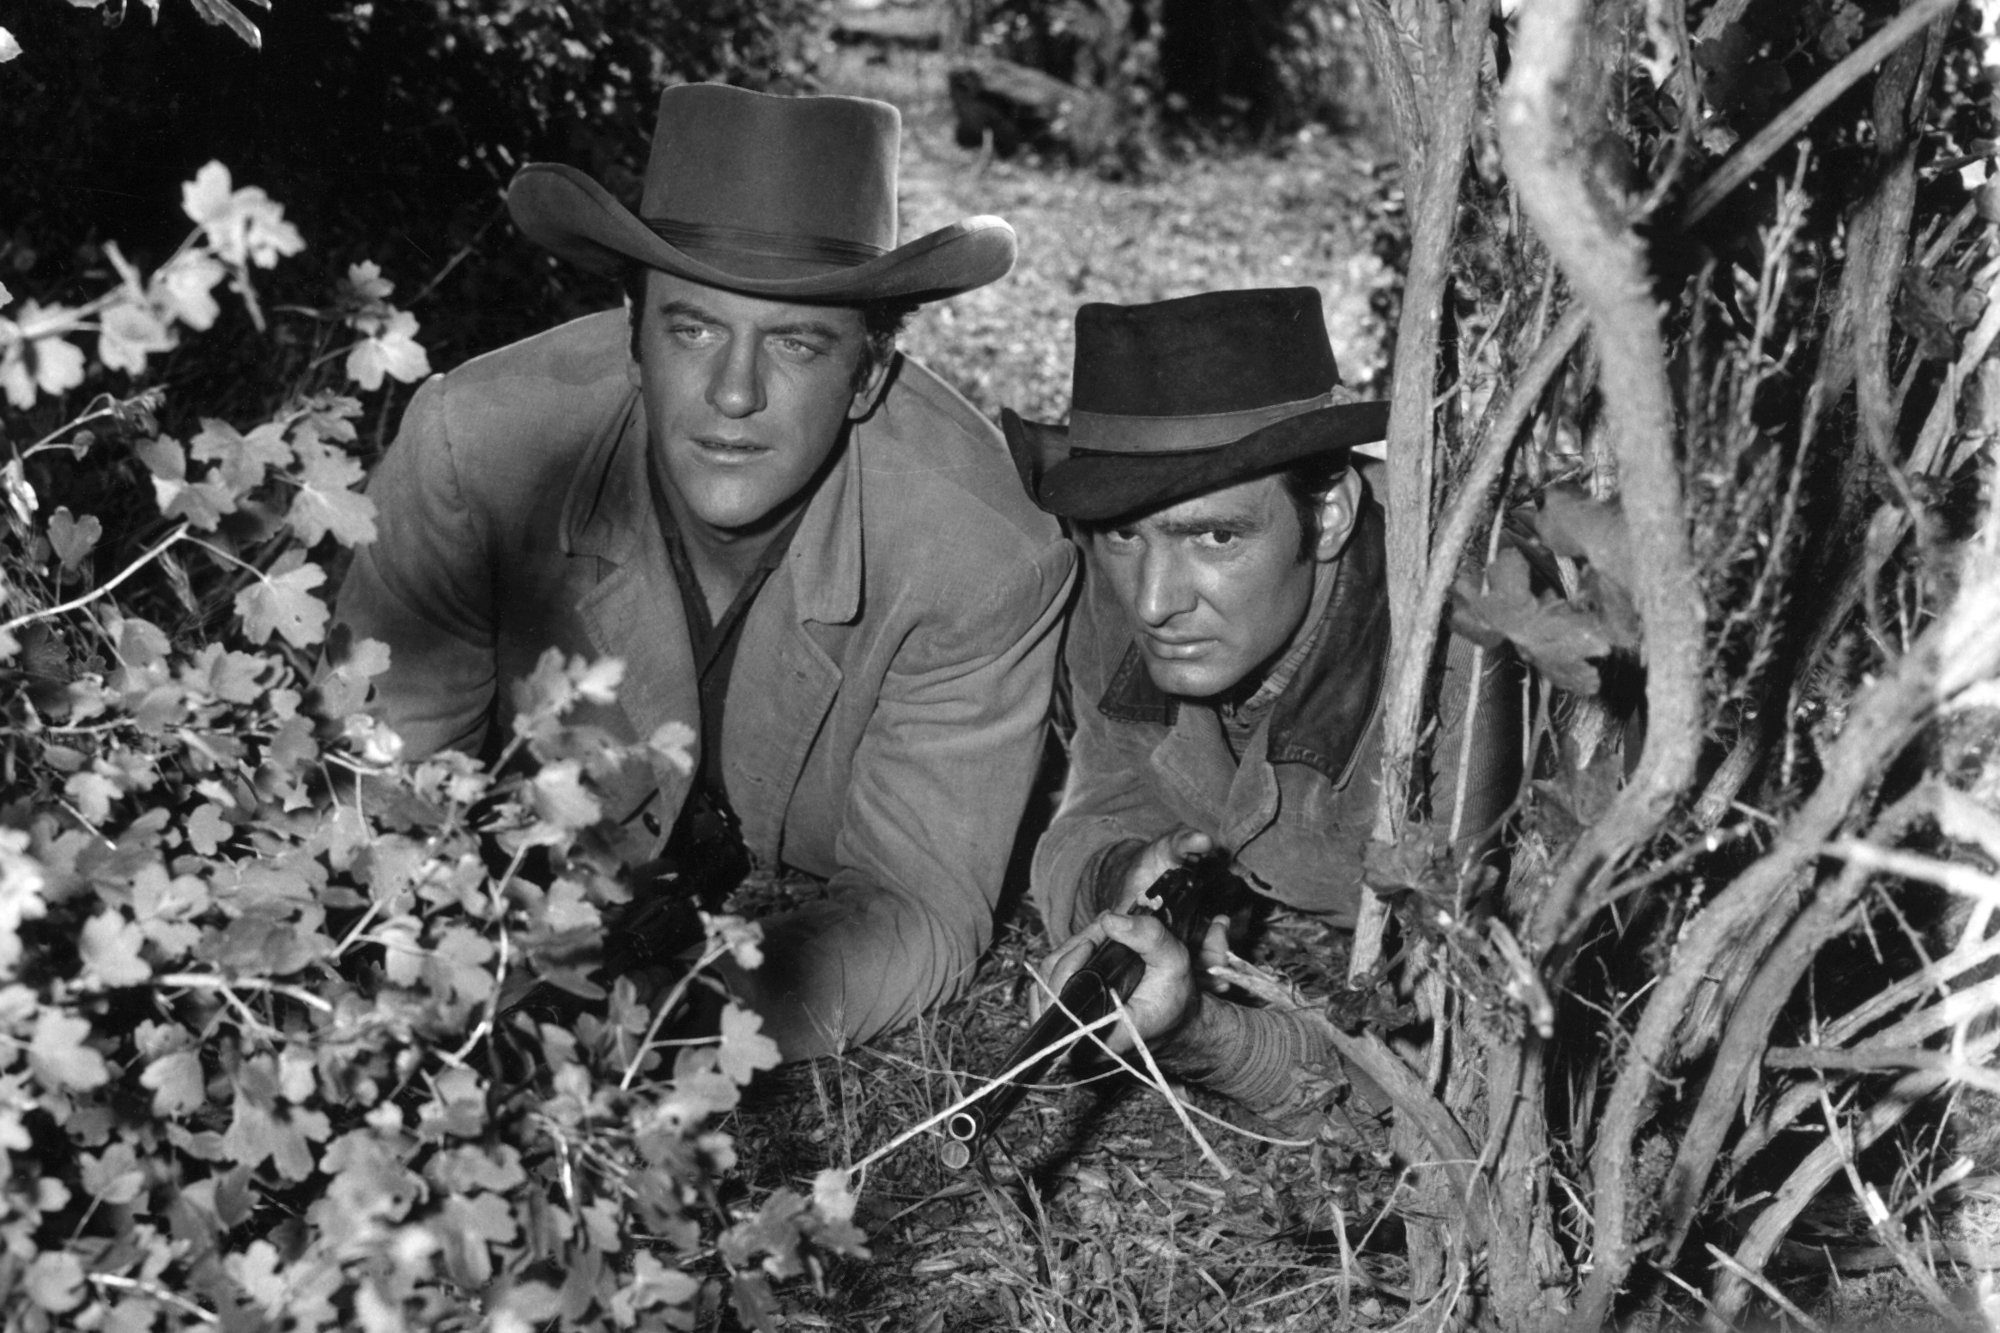 'Gunsmoke' James Arness as Marshal Matt Dillon and Dennis Weaver as Chester Goode crouched down in bushes wearing Western costumes. Chester is holding a gun.